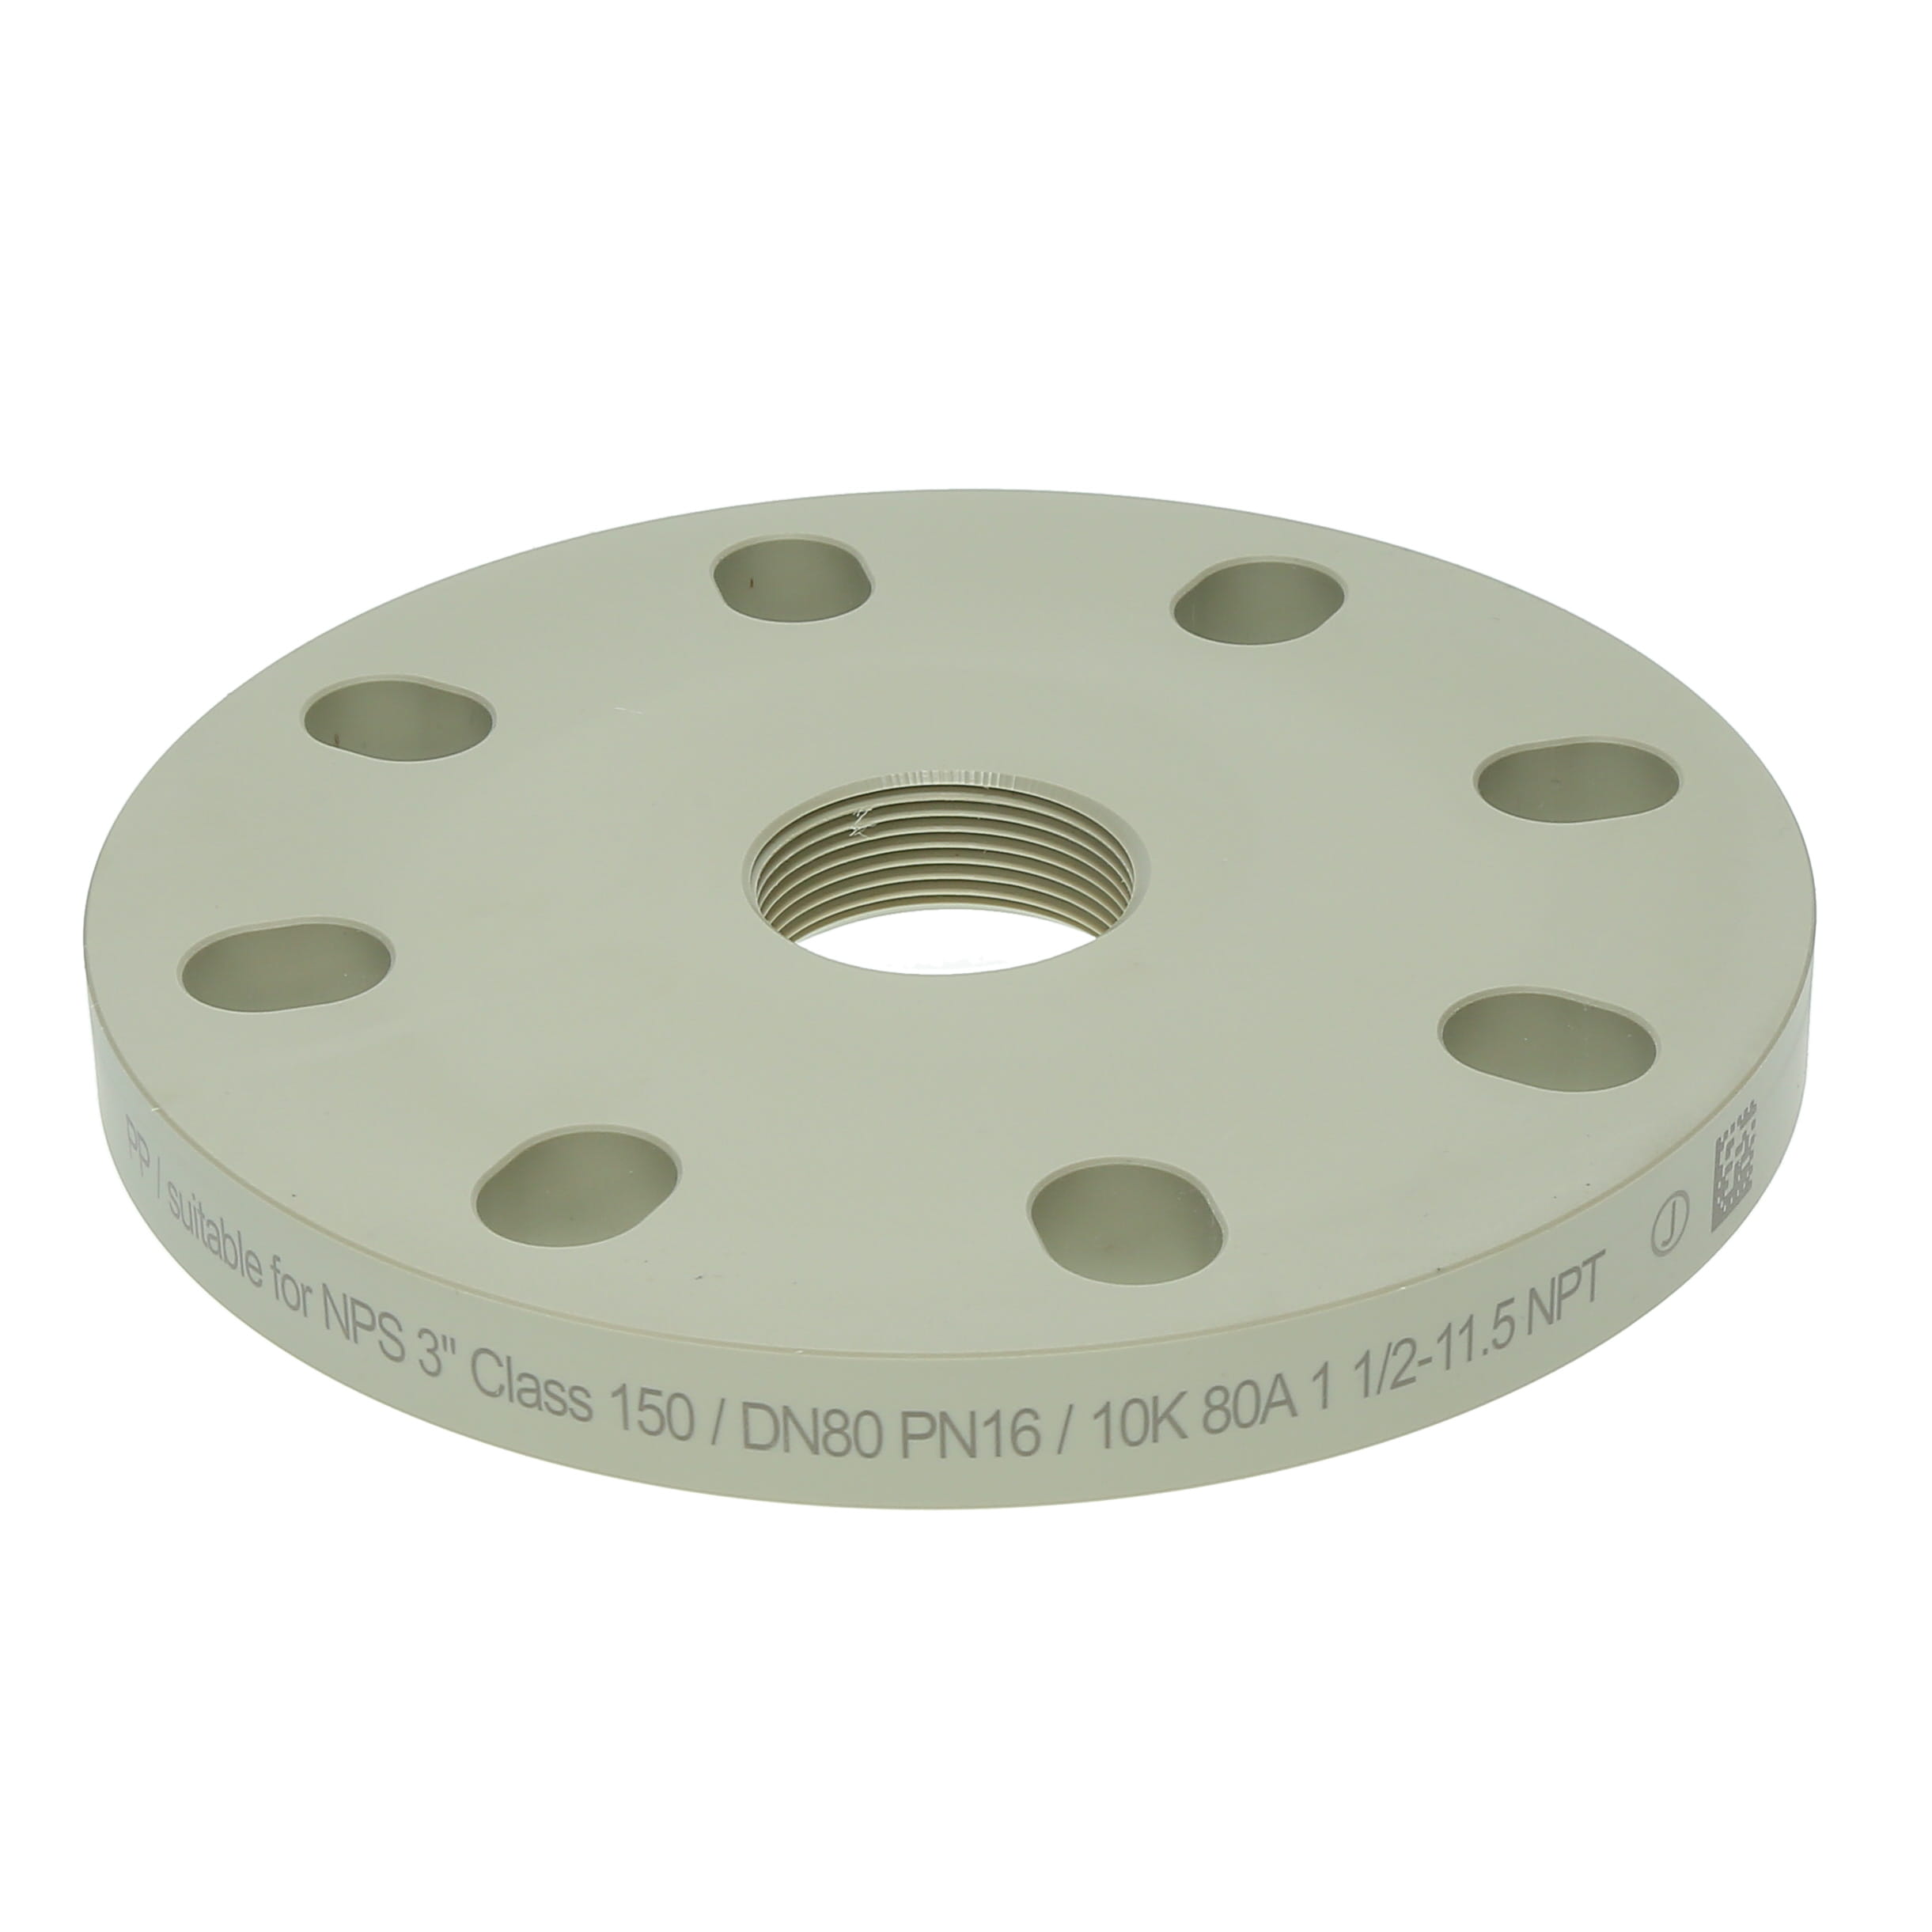 Endress+Hauser - FAX50-XJGG - Screw in flange FAX50, UNI flange 3DN8080,  PP max 4bar abs58psia, NPT1-12 - RS